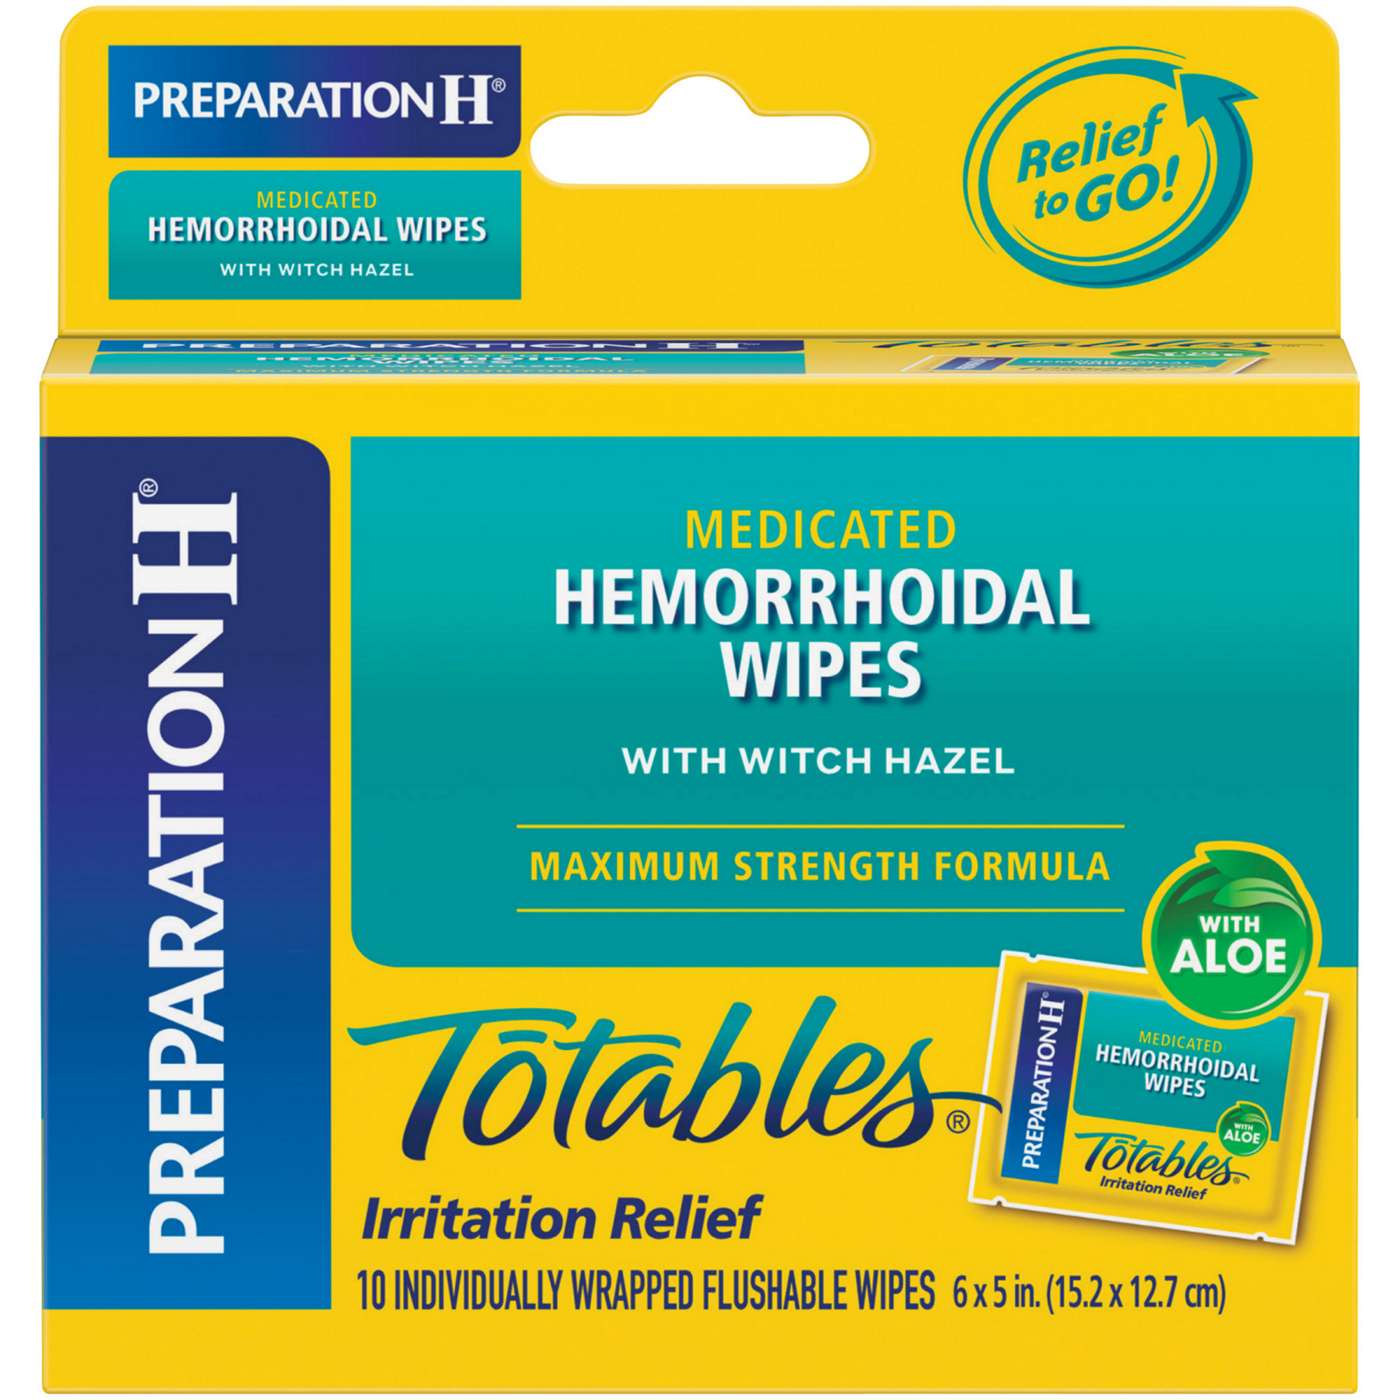 Preparation H Flushable Medicated Hemorrhoidal Wipes Max Strength Relief; image 1 of 4